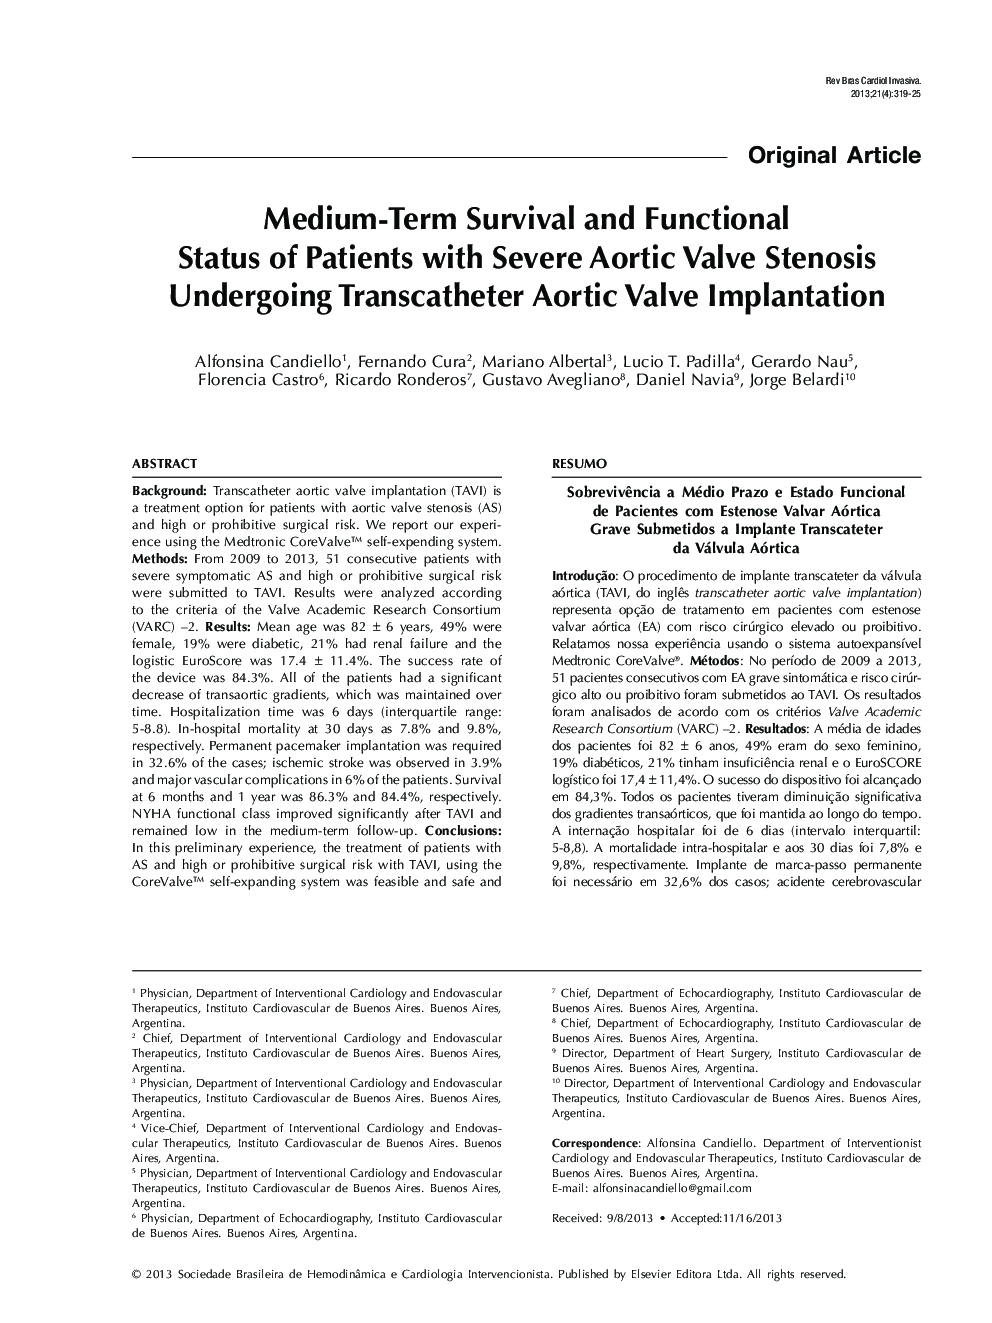 Medium-Term Survival and Functional Status of Patients with Severe Aortic Valve Stenosis Undergoing Transcatheter Aortic Valve Implantation